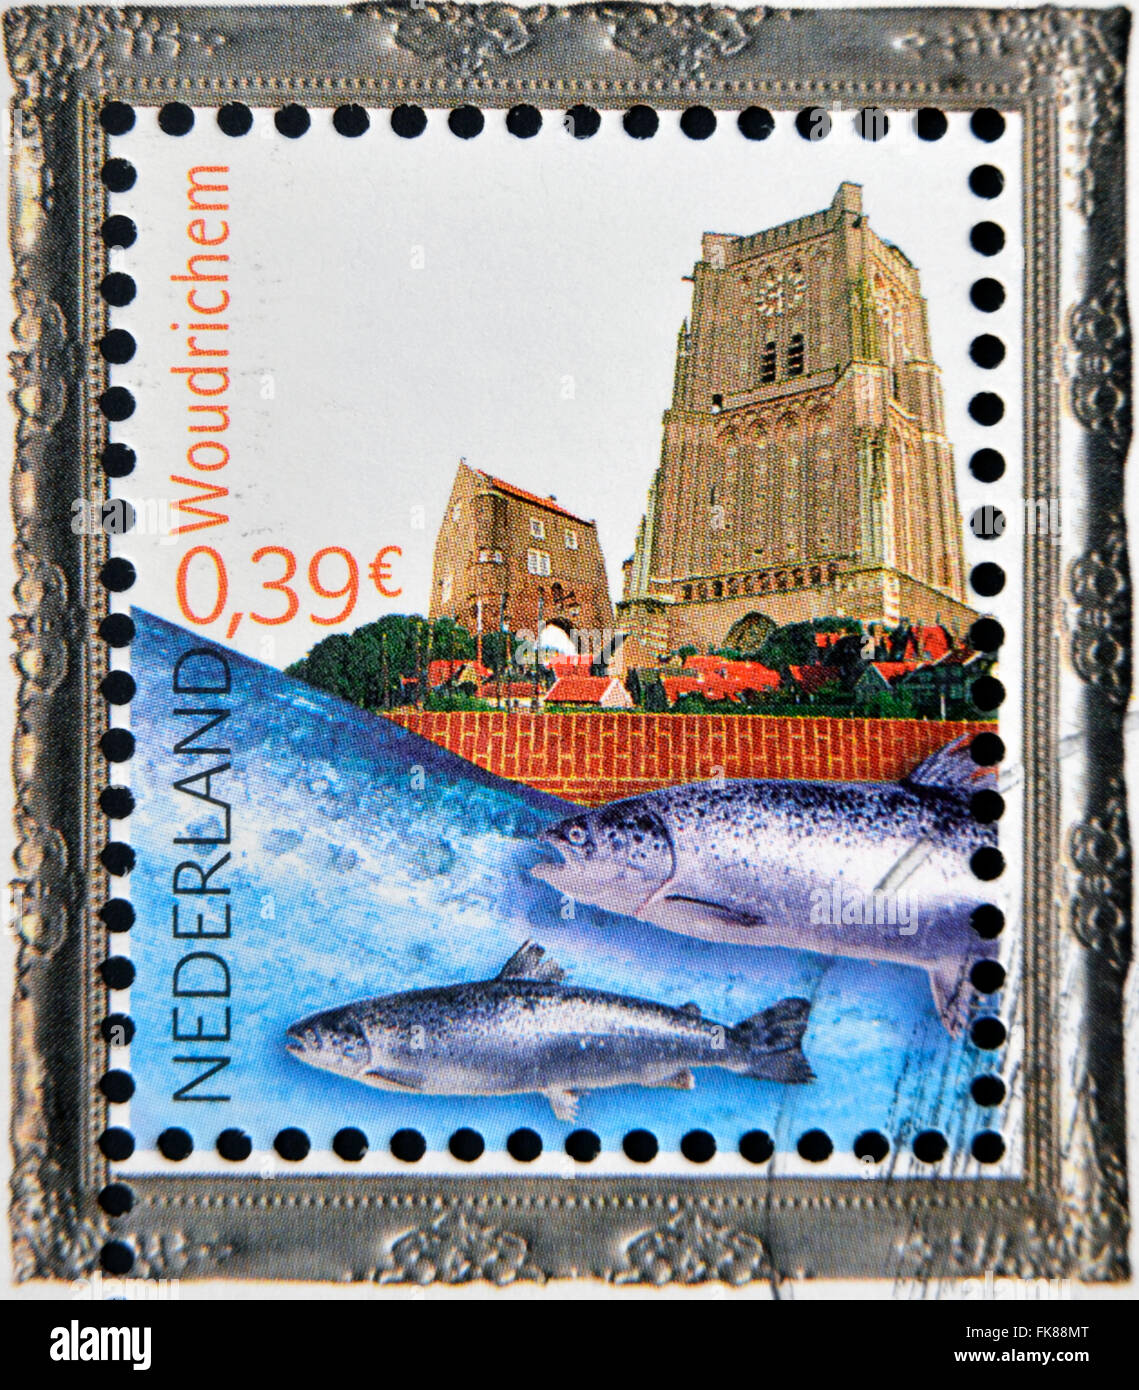 HOLLAND - CIRCA 2006: A stamp printed in Netherlands dedicated to beautiful Holland, shows Woudrichem, circa 2006 Stock Photo